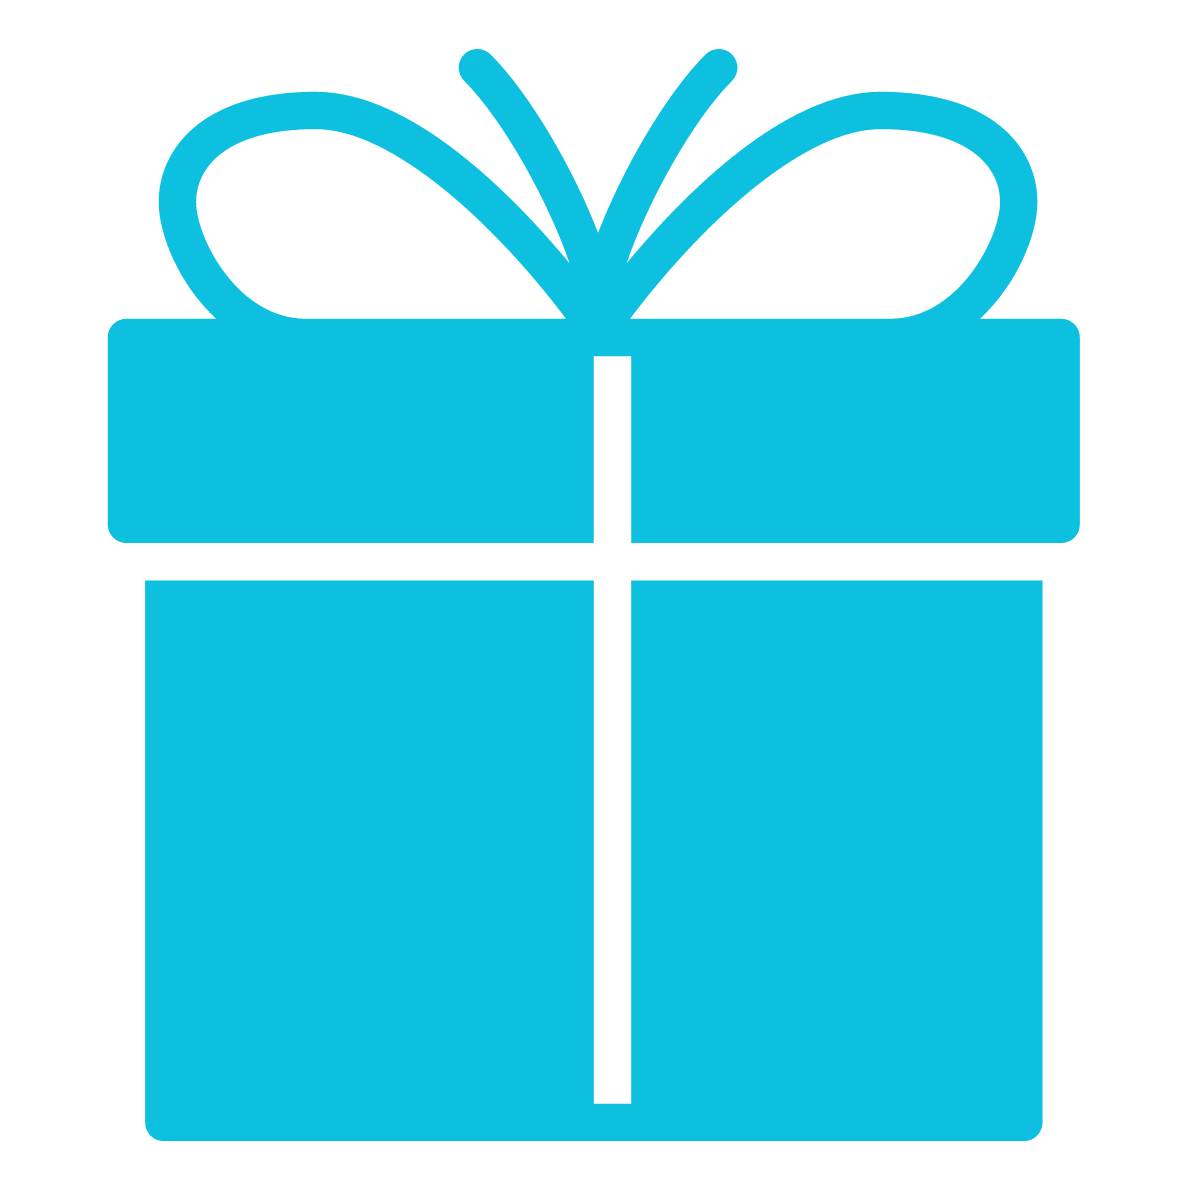 Hire Shopify Experts to integrate LDT Gift Wrap app into a Shopify store